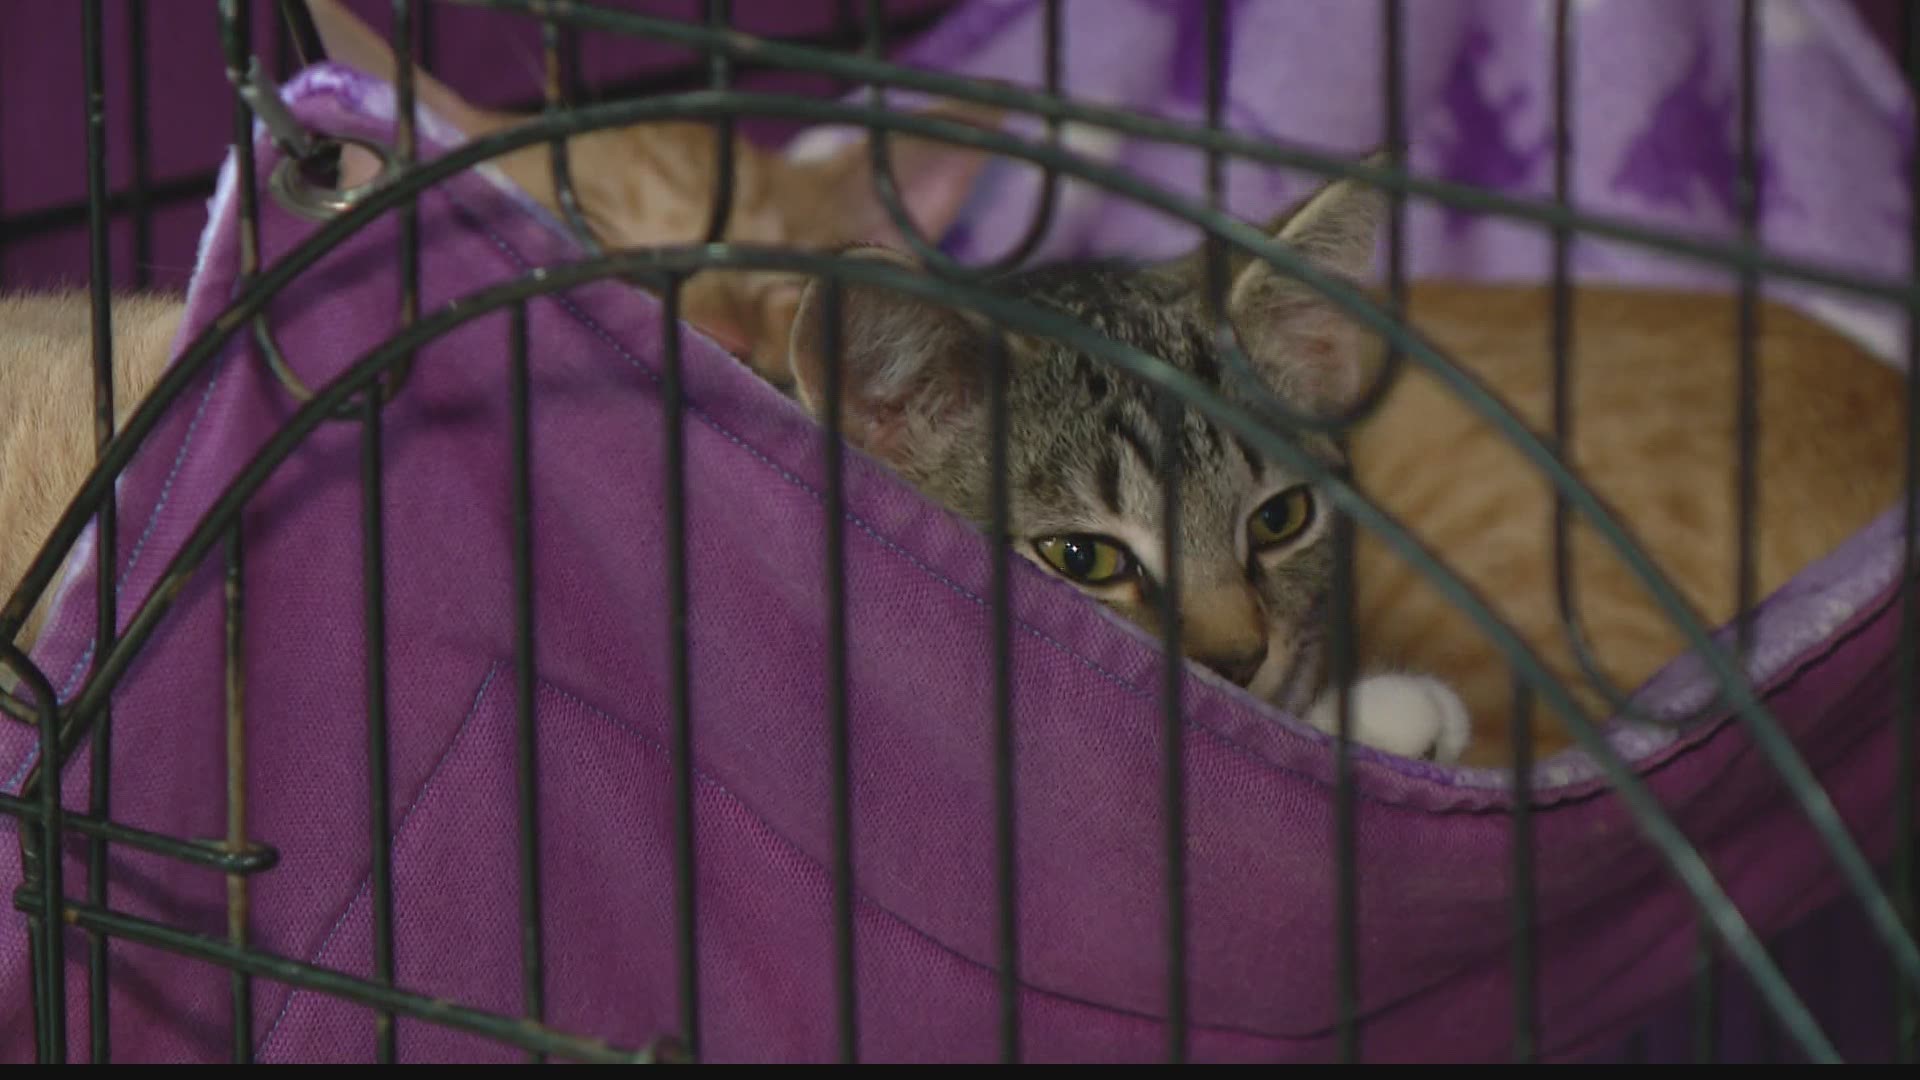 Summer camps at Indy Humane were canceled due to coronavirus concerns, so the shelter had to get creative with a way for kids to engage with animals.